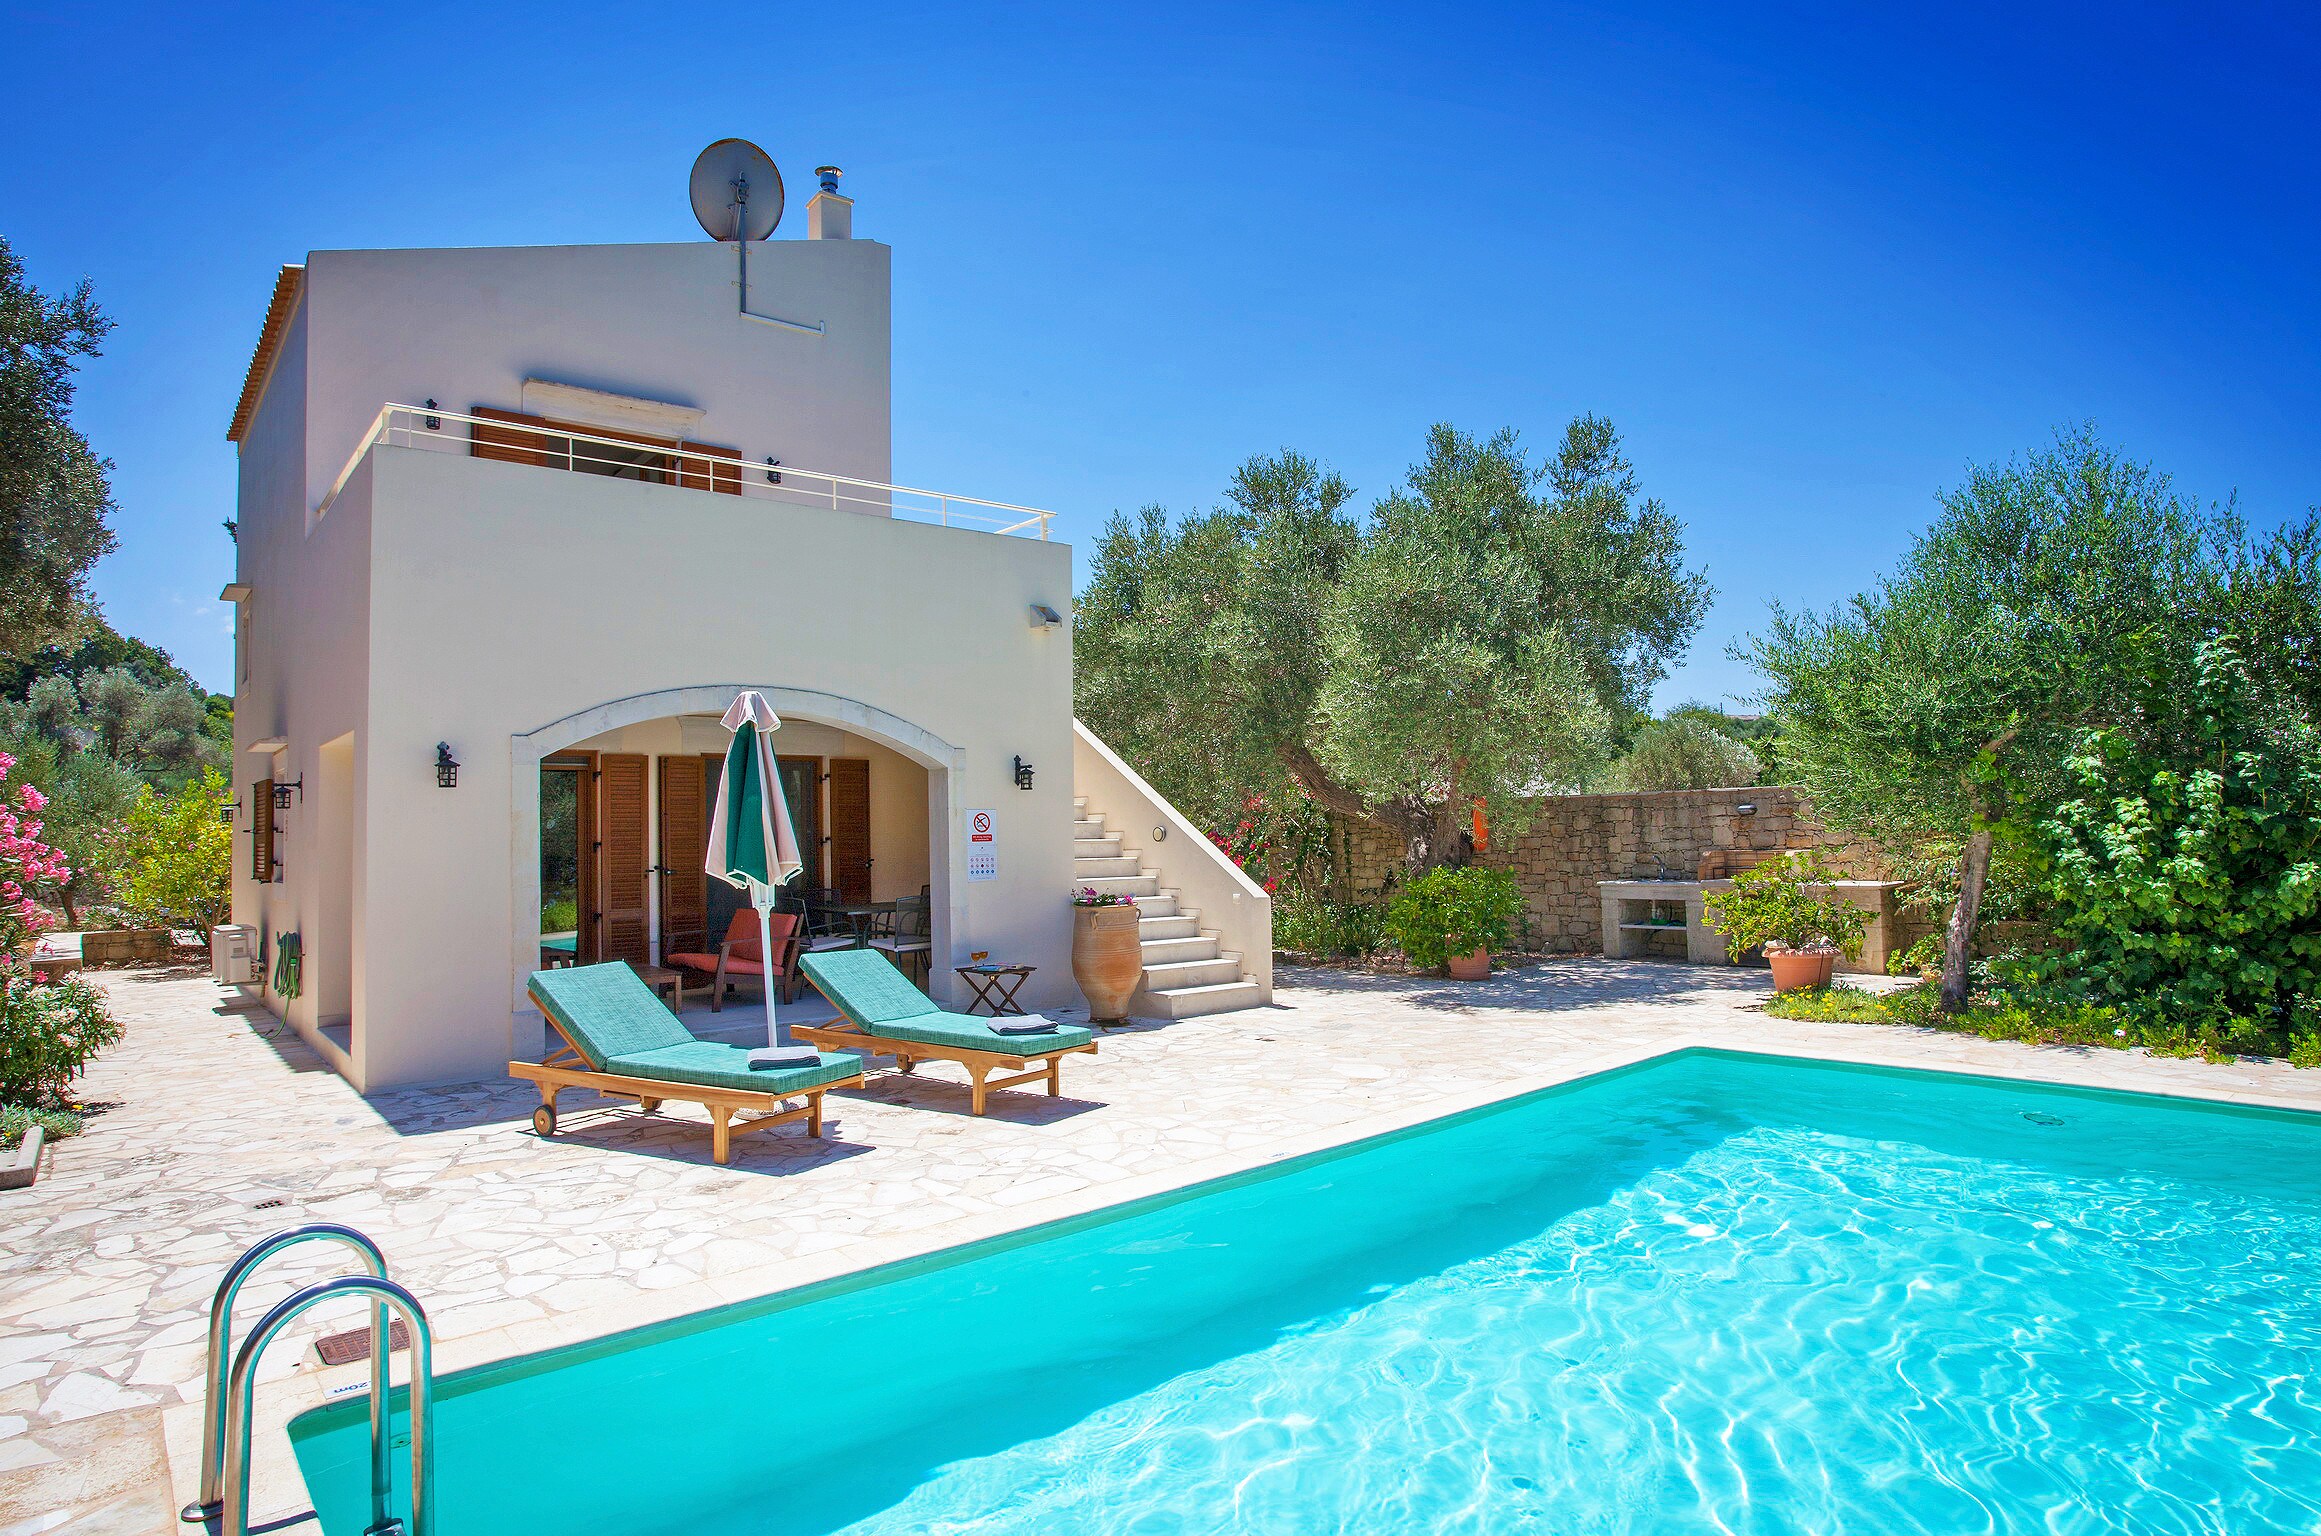 Main facade and swimming pool of Rural Villa,Private pool,Near Tavern,ideal for couples